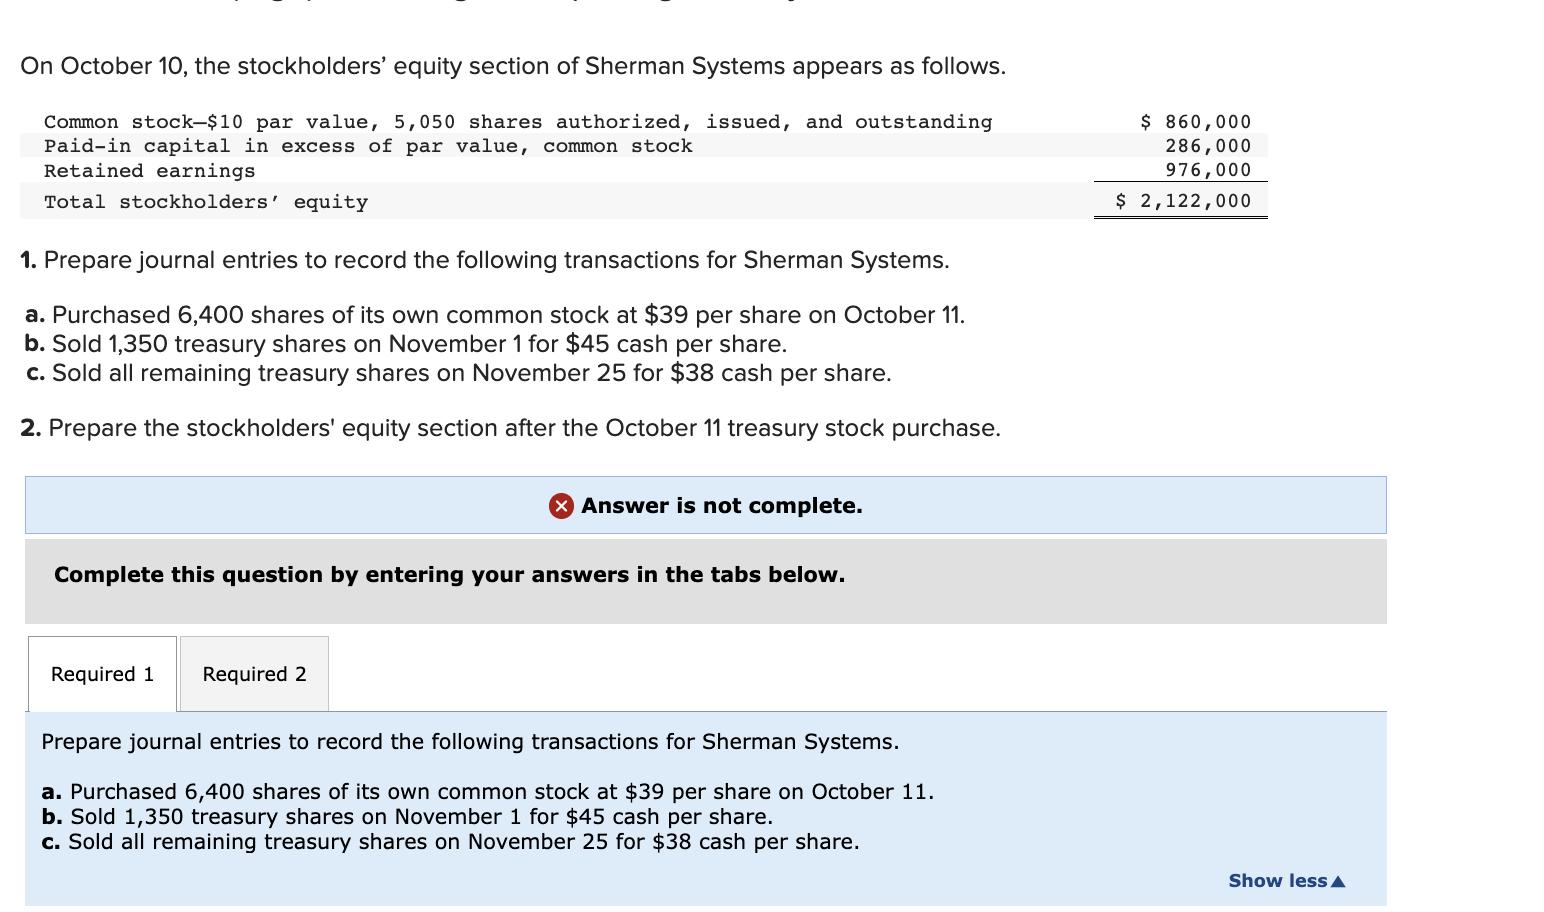 1. Prepare journal entries to record the following transactions for Sherman Systems. a. Purchased 6,400 shares of its own com